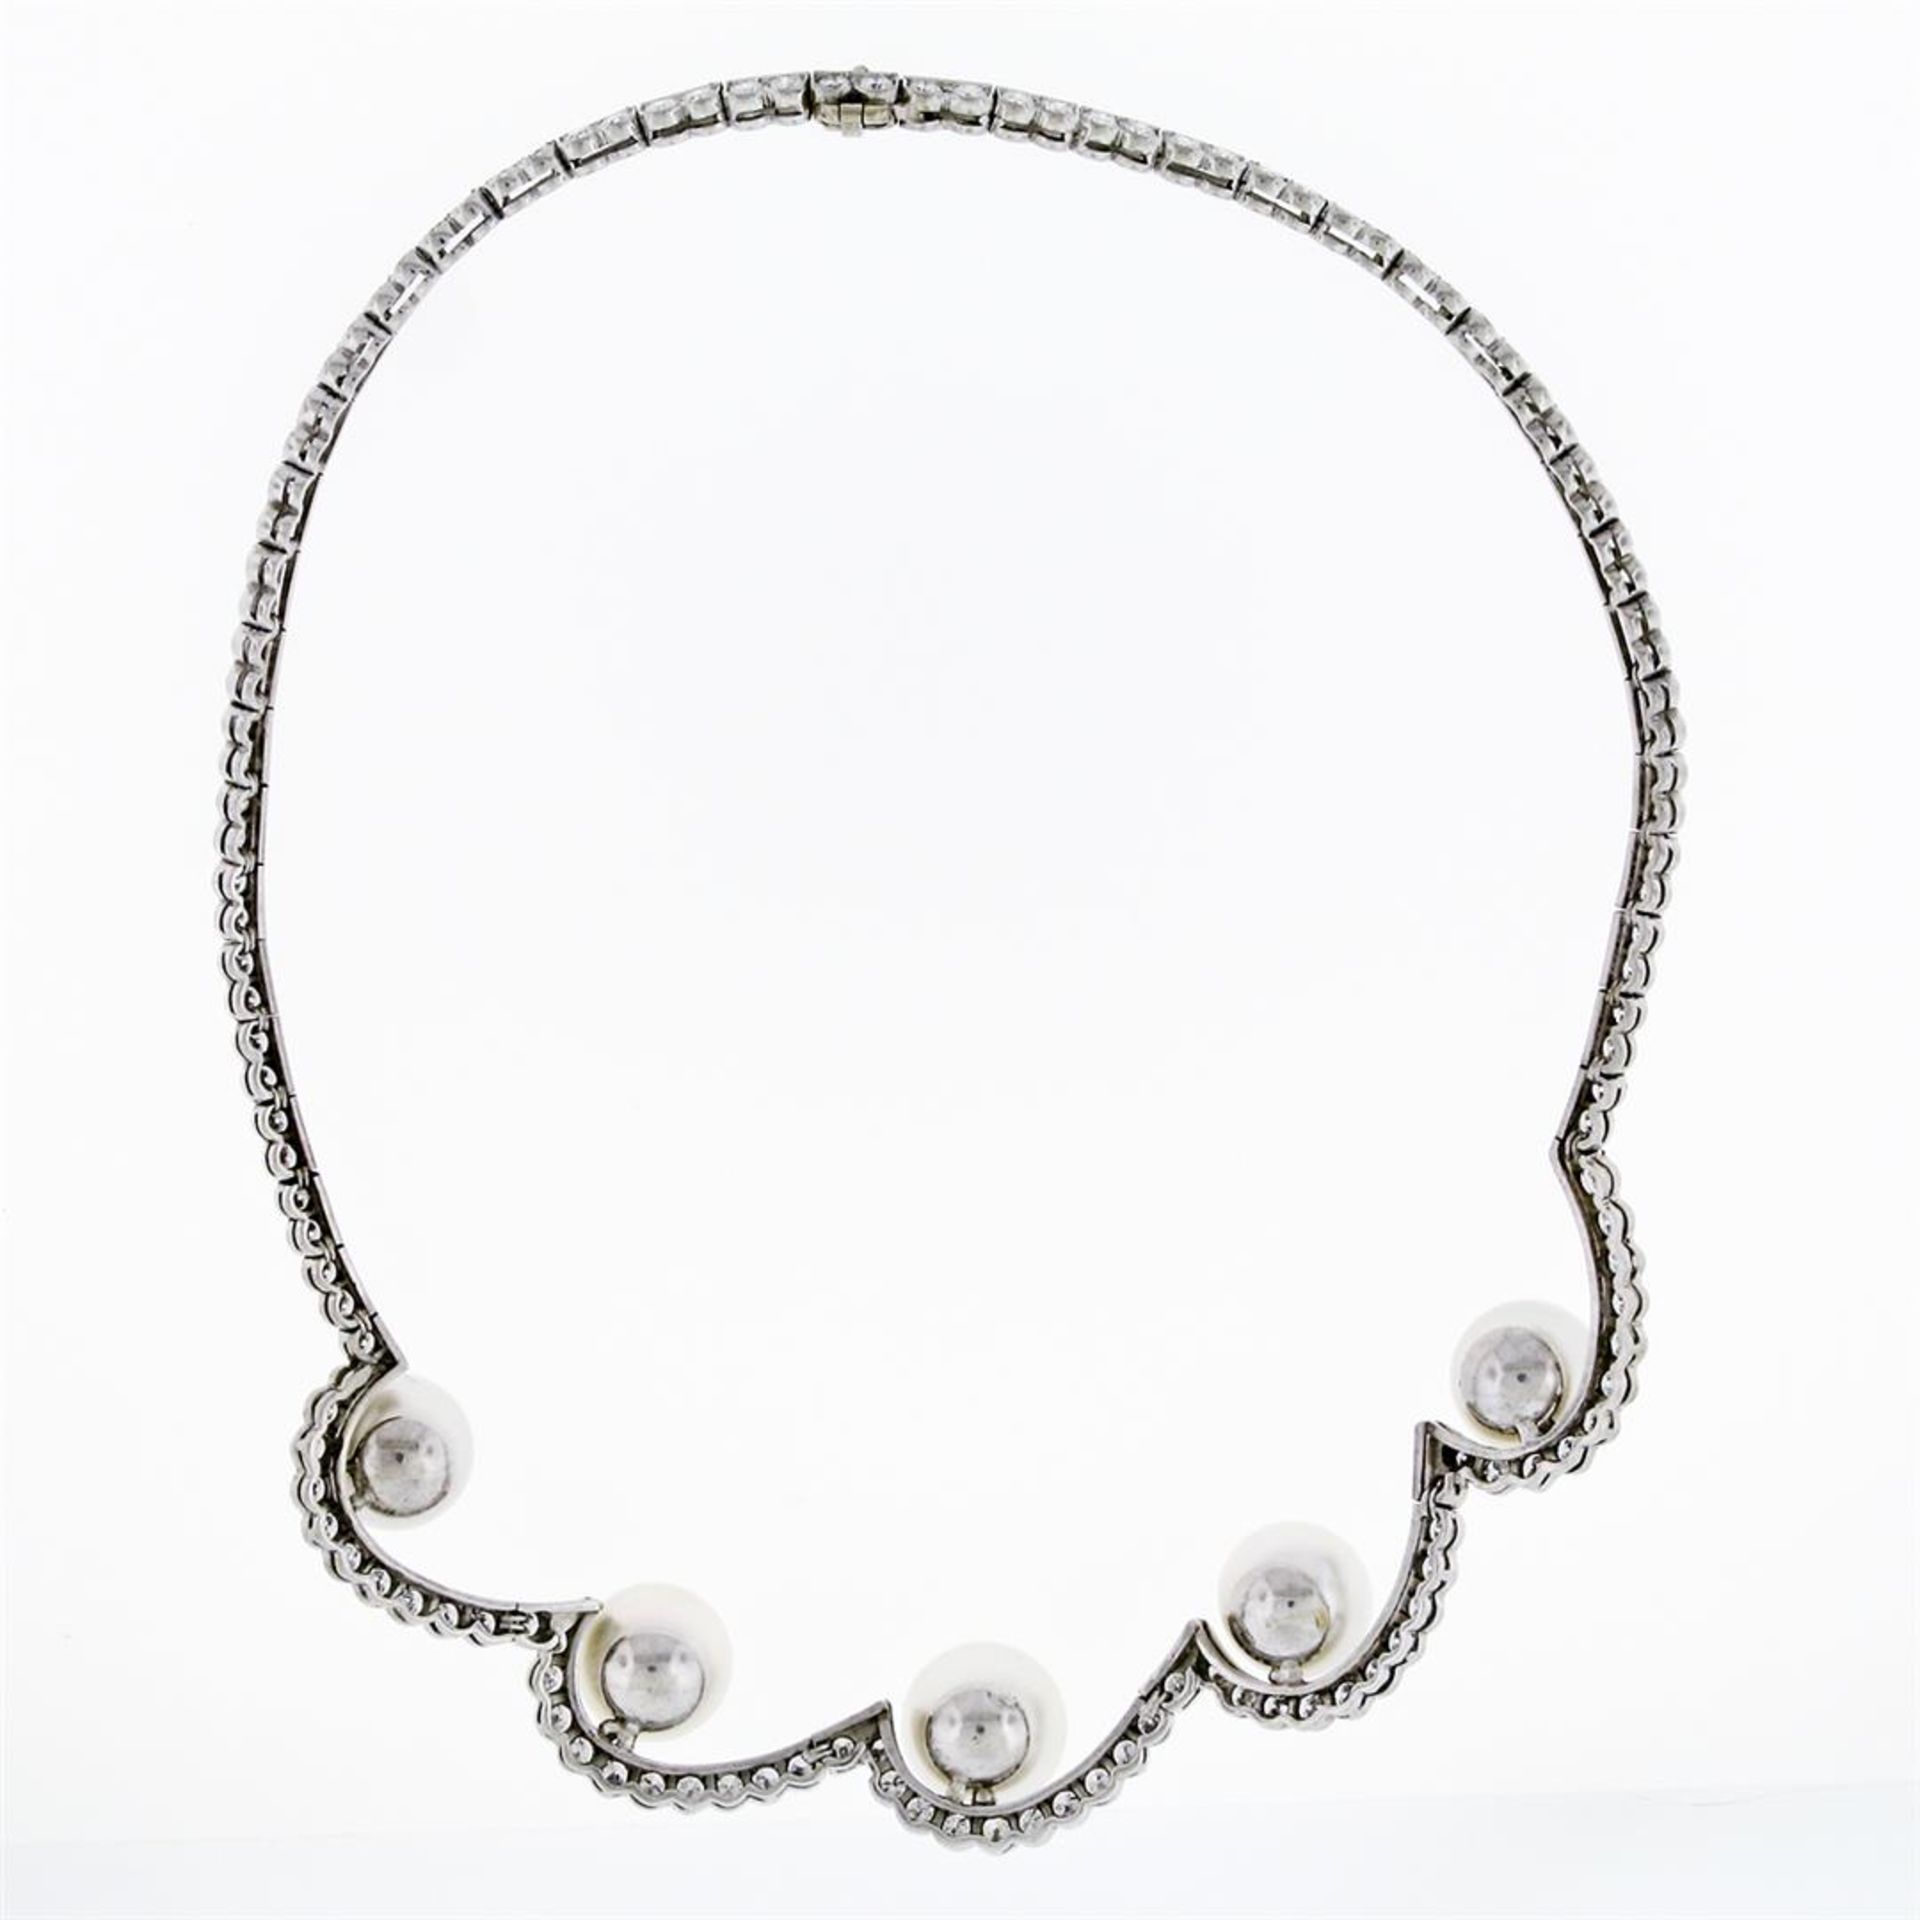 Platinum 10.25ctw Diamond & Floating South Sea Pearl Statement Necklace - Image 6 of 9